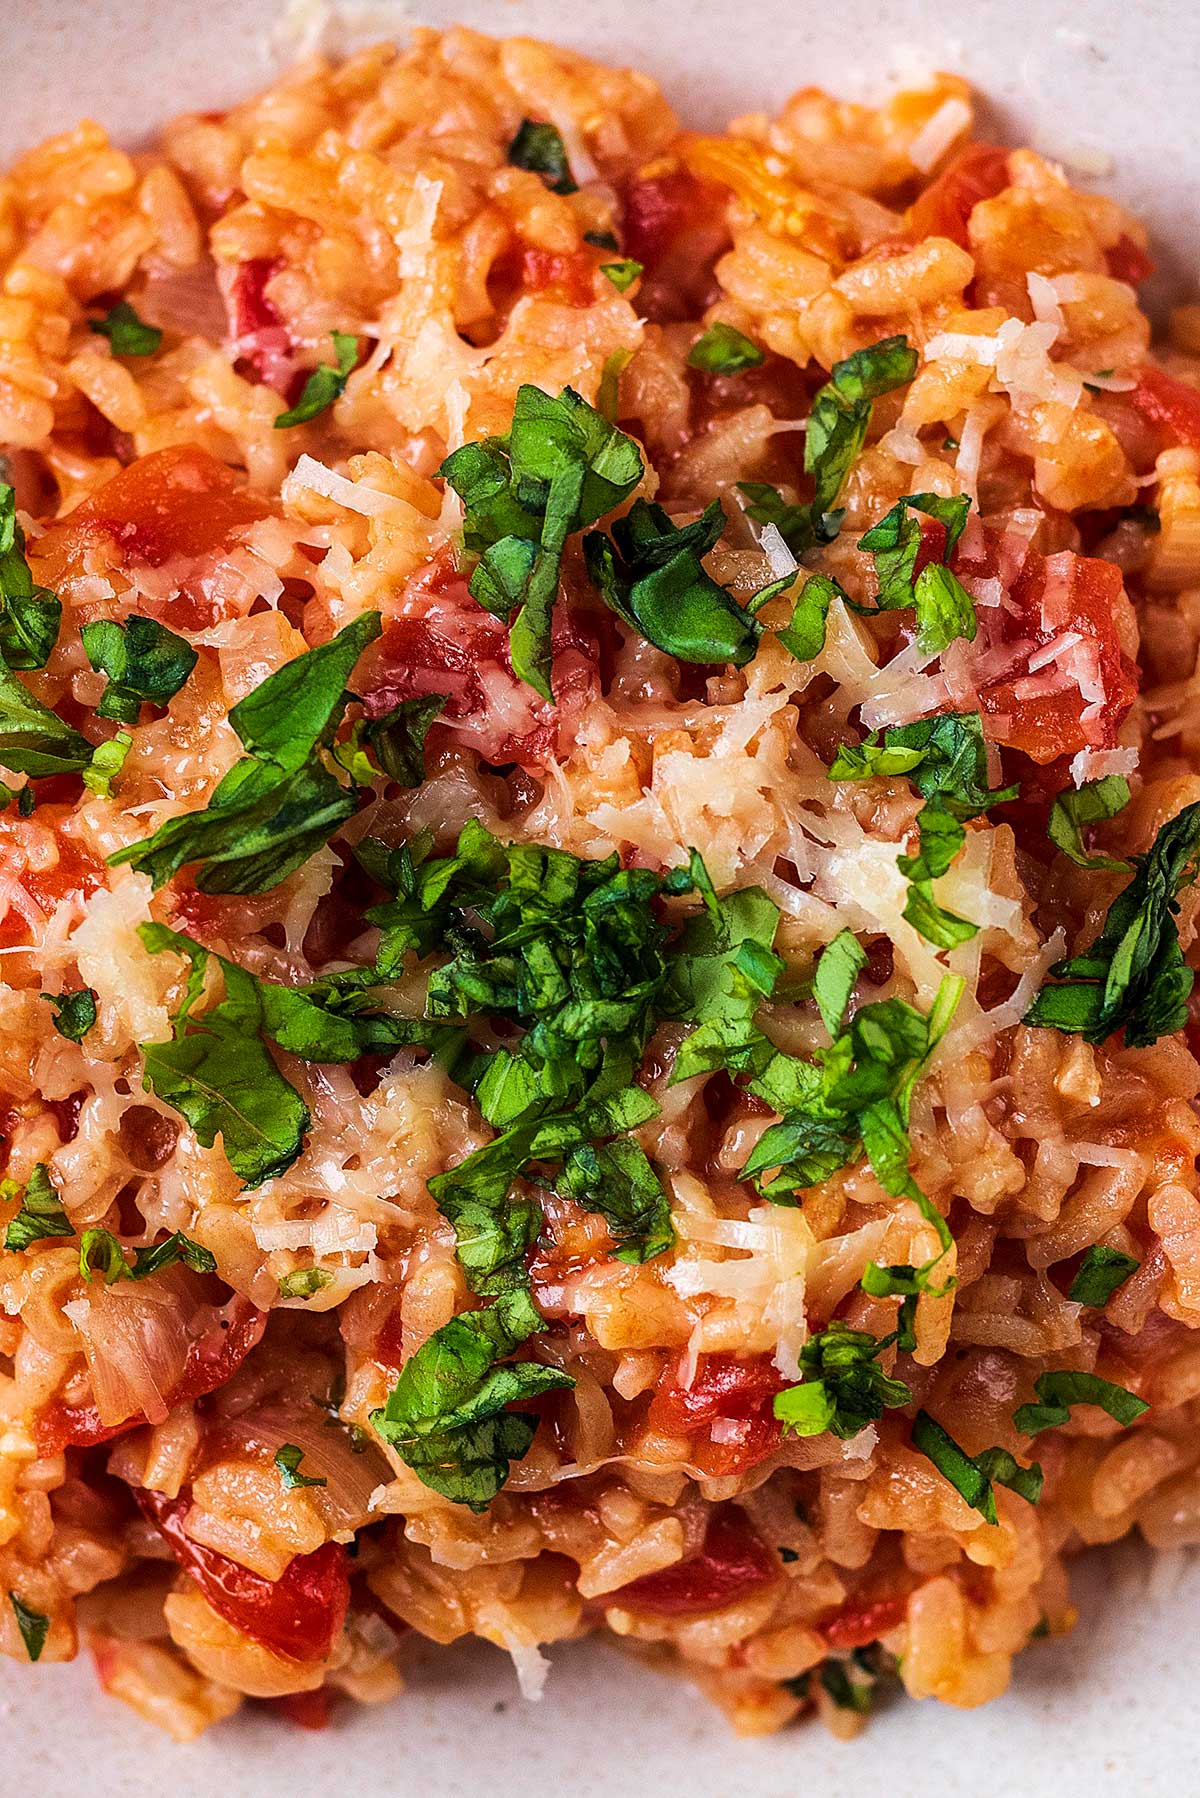 Tomato risotto with grated cheese and chopped herbs on top.